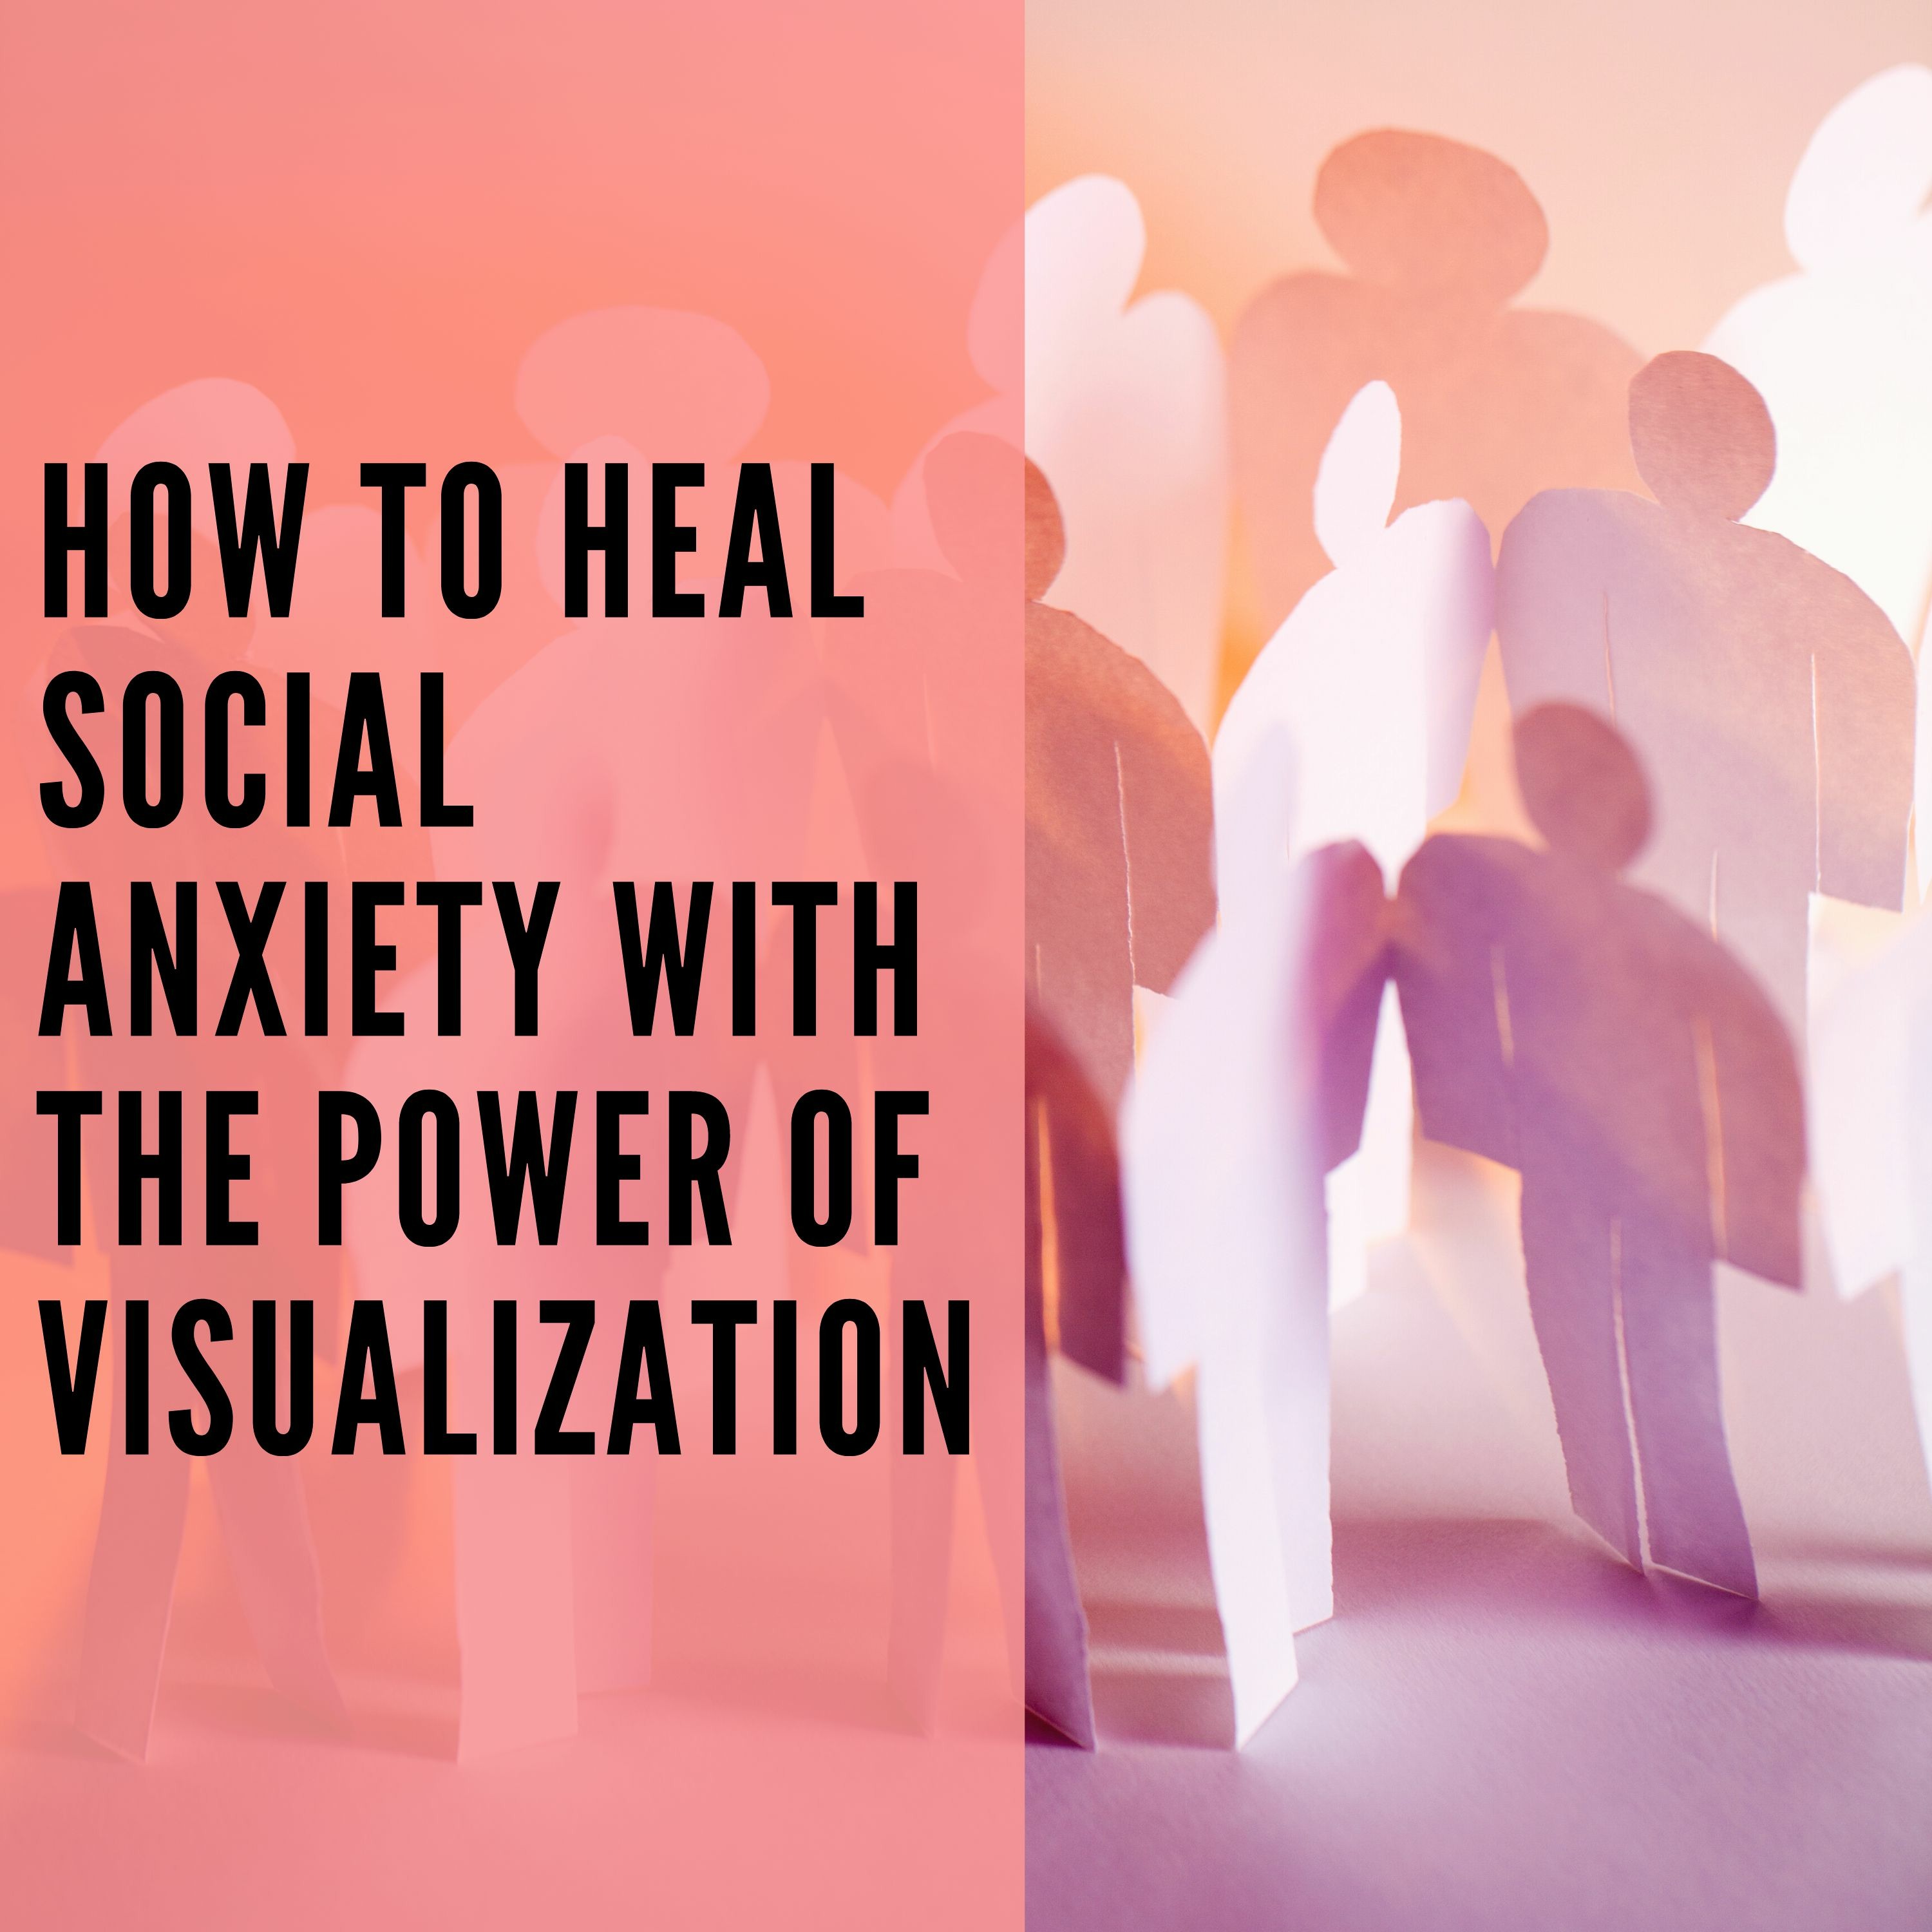 How to Heal Social Anxiety With Visualization